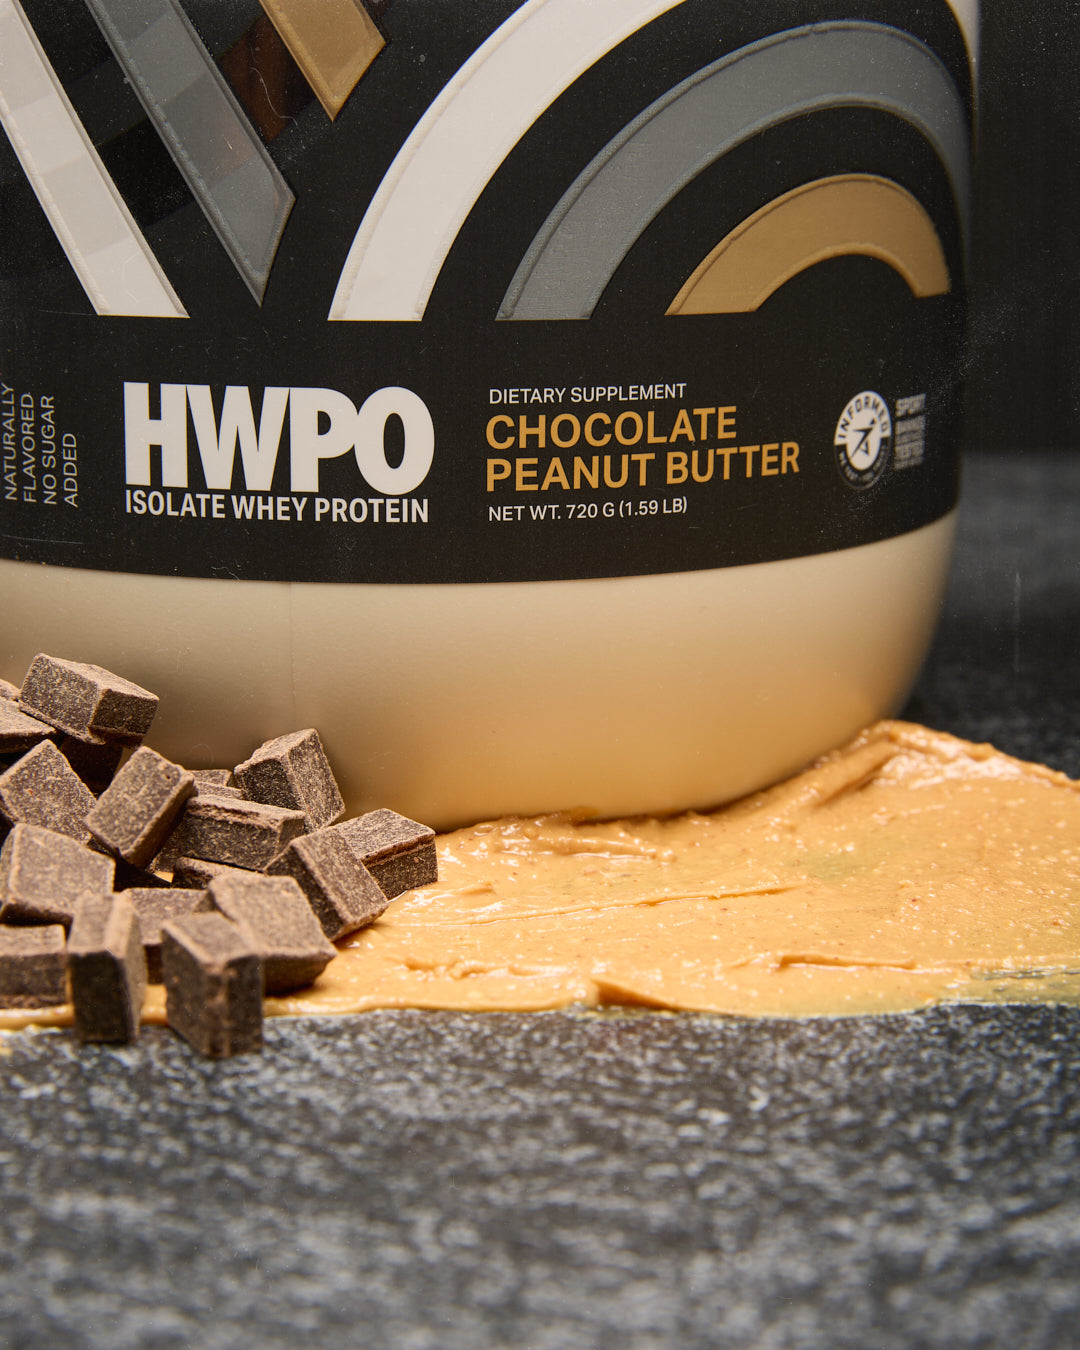 Podium HWPO Whey Isolate Protein Chocolate Peanut Butter